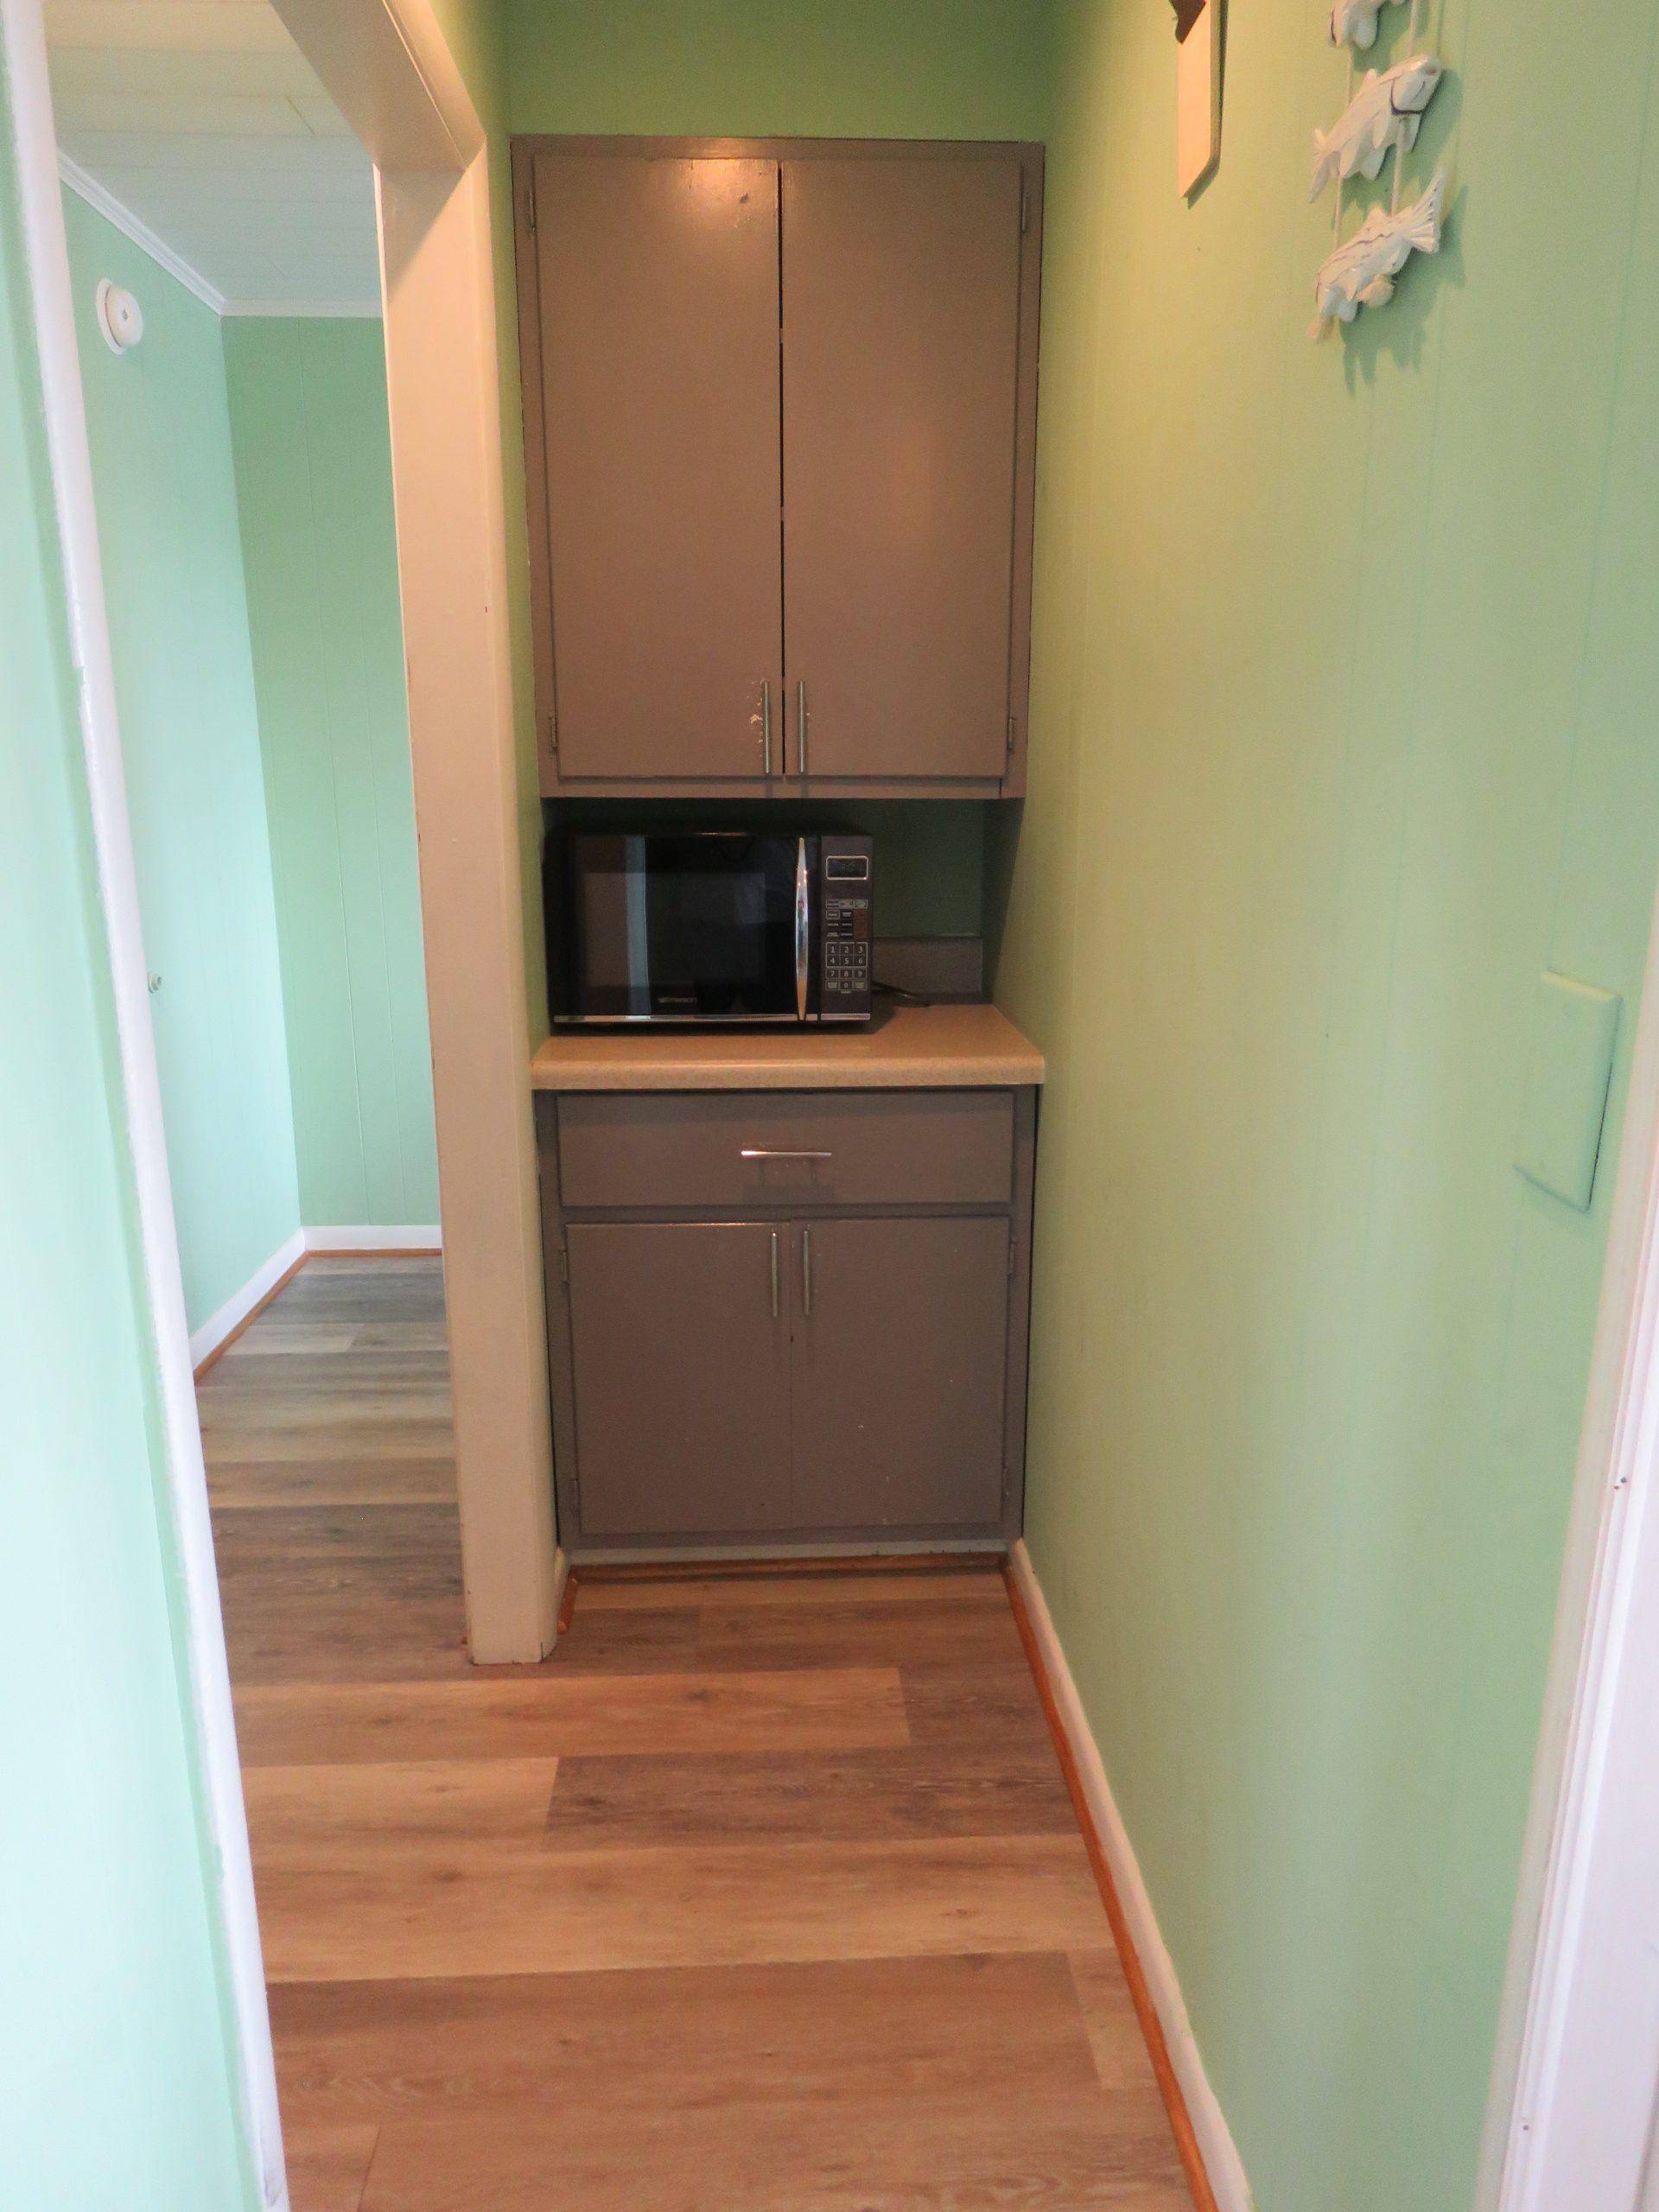 Pantry Space and Microwave